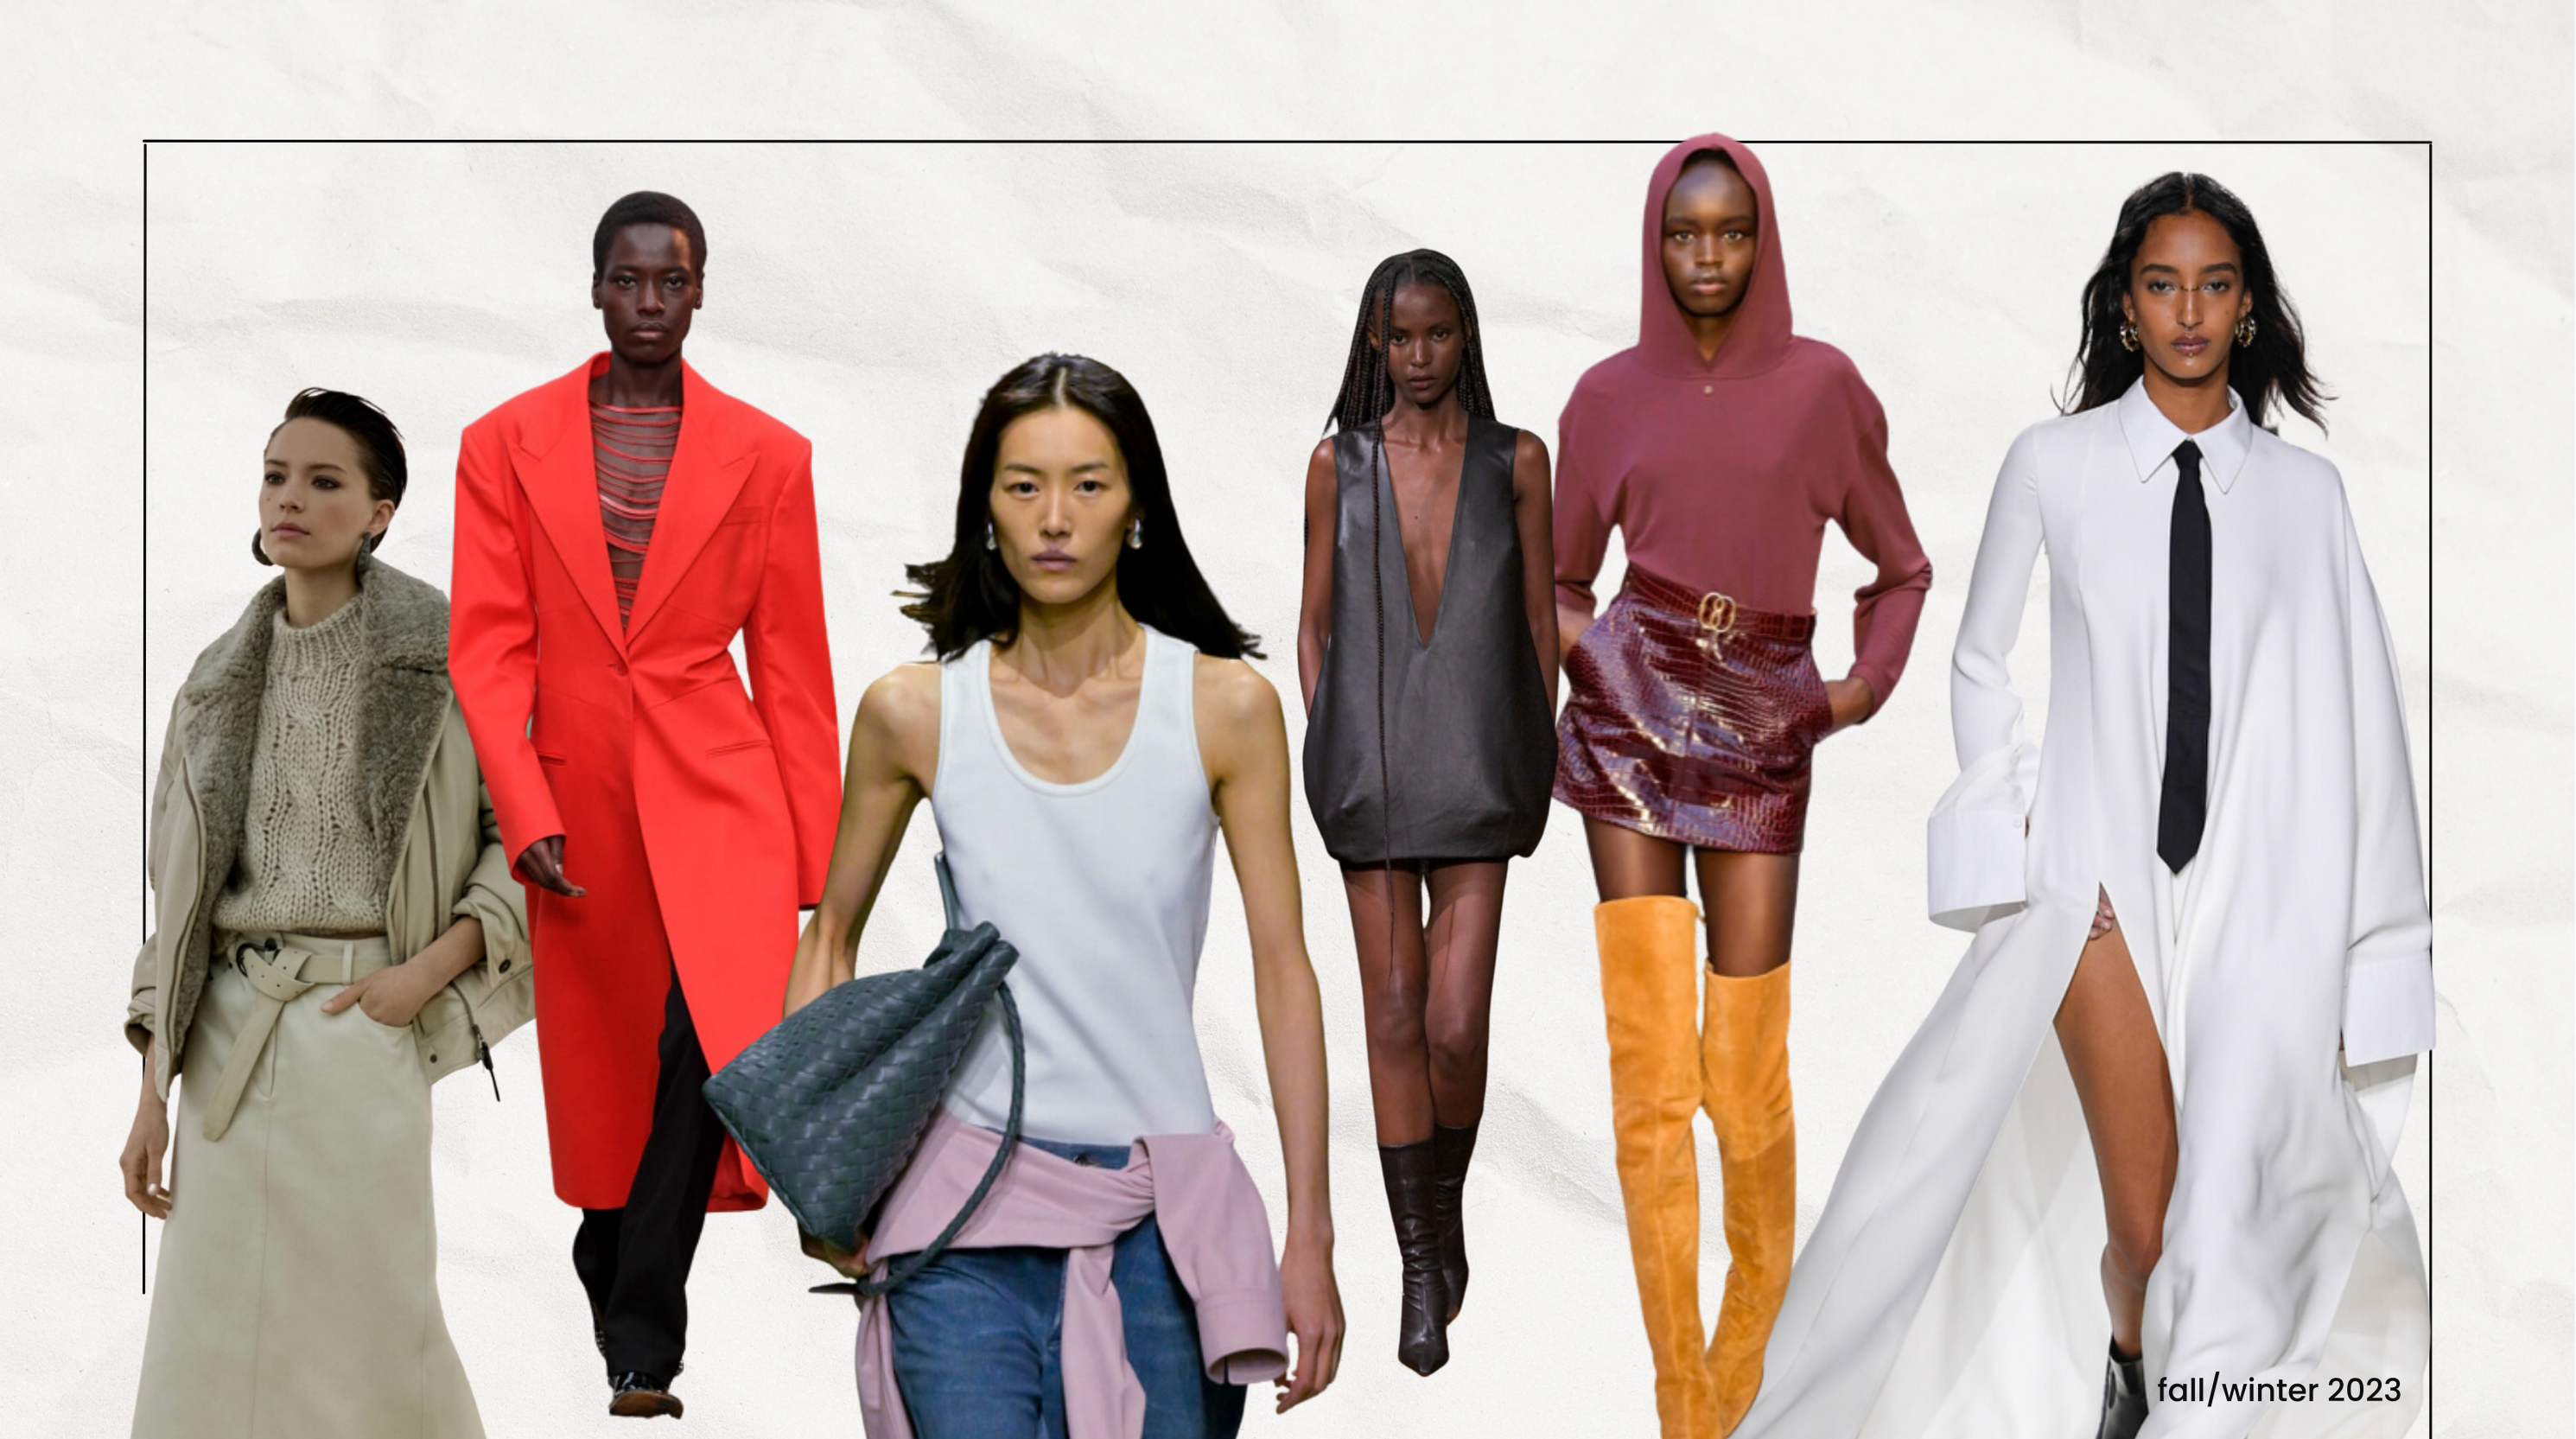 Bonprix publishes the results of the 'Fashion Report 2023', a survey on  what women expect from fashion and the fashion industry